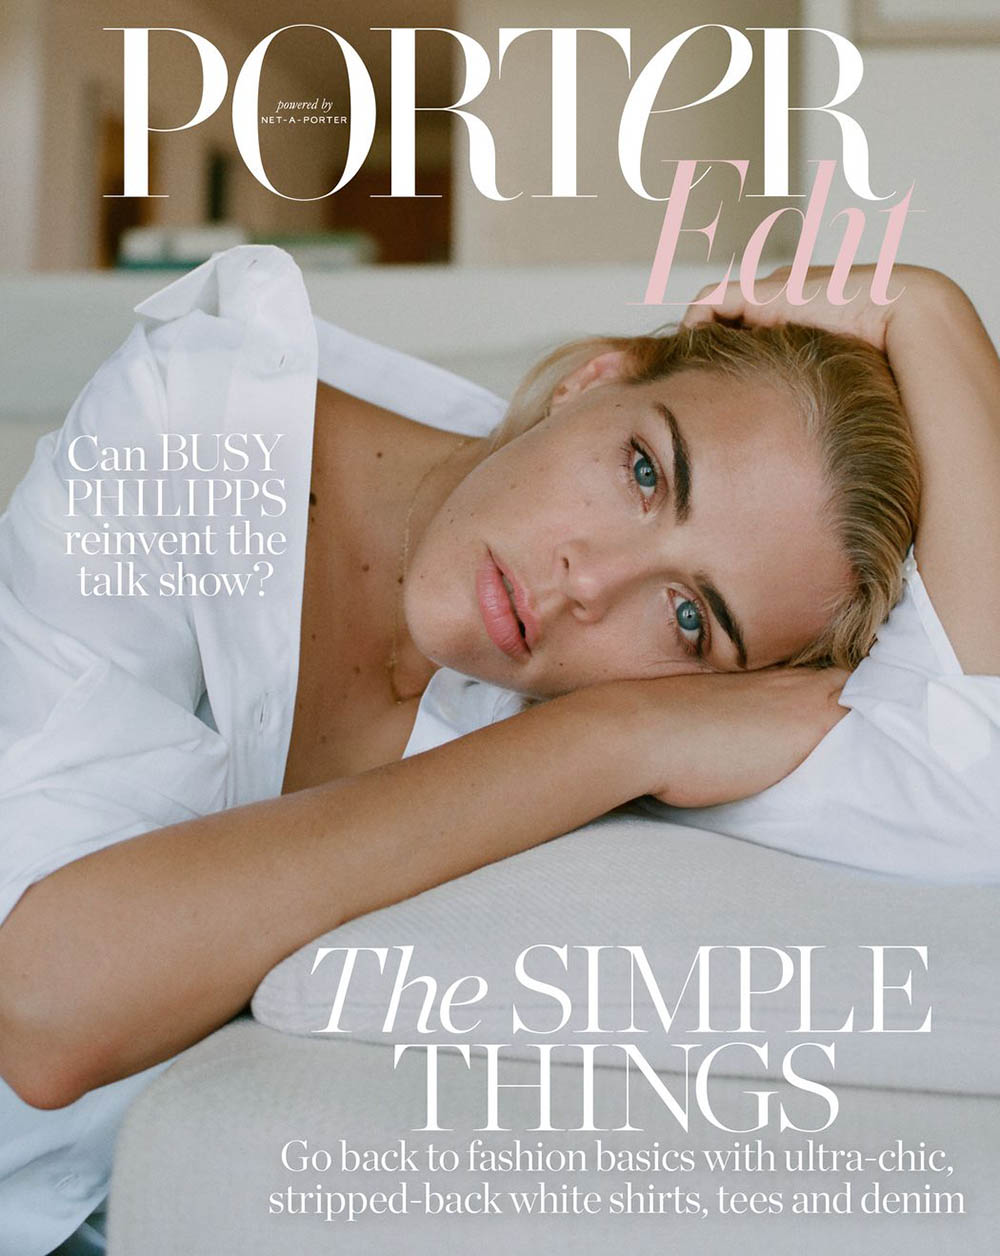 Busy Philipps covers Porter Edit July 27th, 2018 by Matthew Sprout